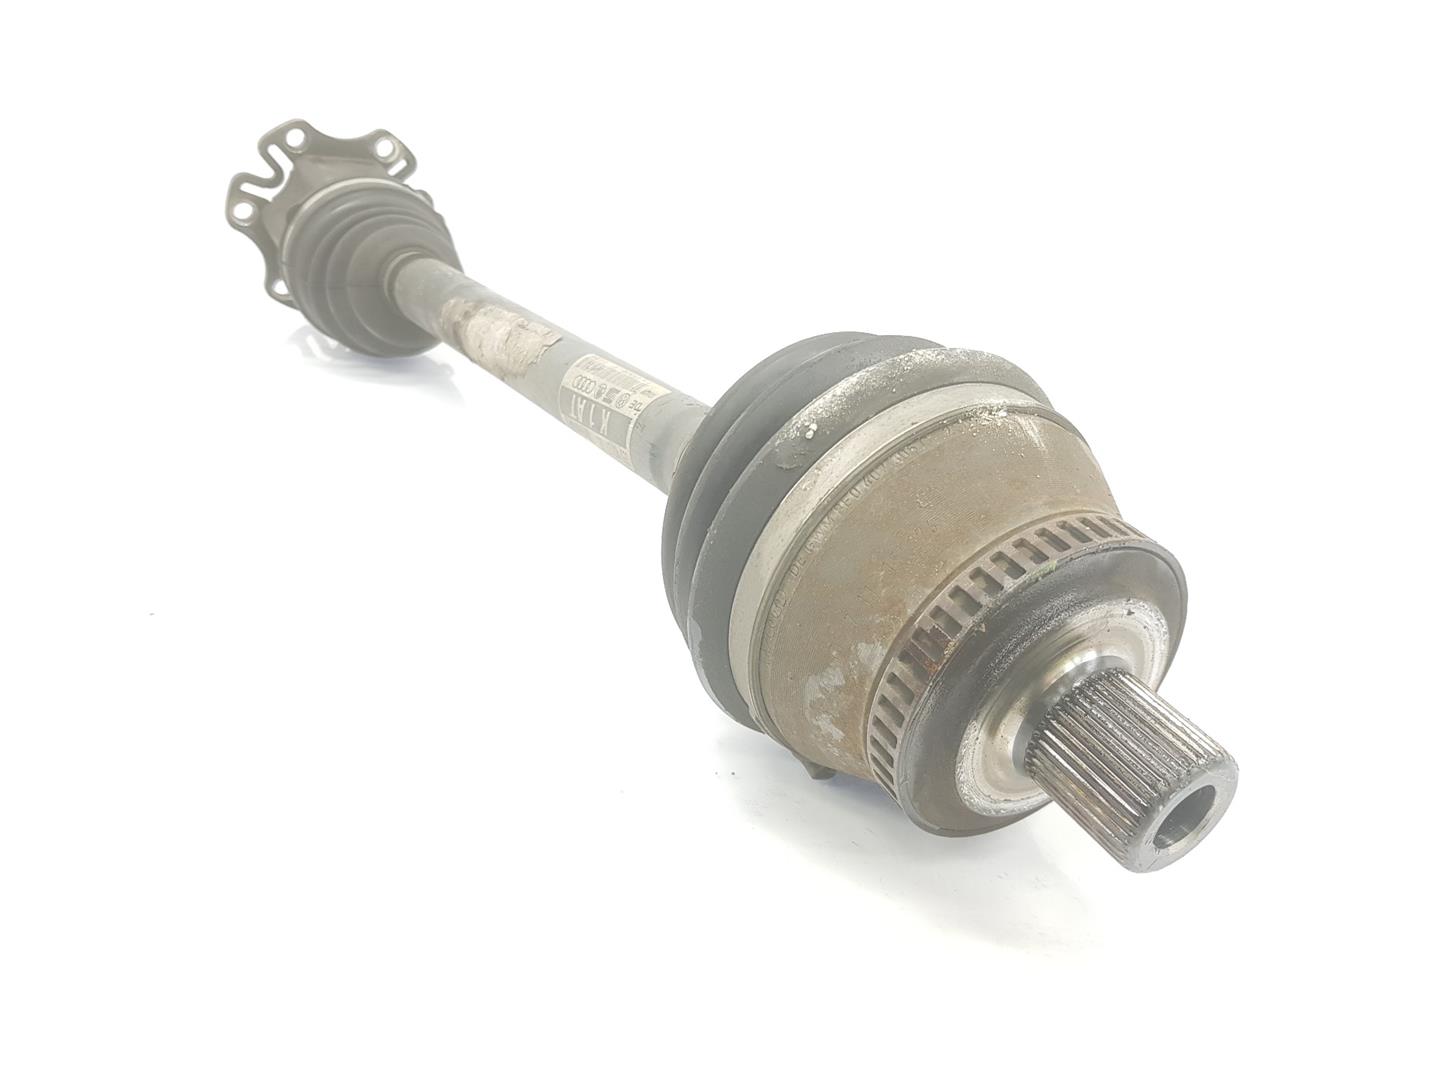 SEAT Exeo 1 generation (2009-2012) Front Left Driveshaft 8E0407271AT, 8E0407271AT 24220579